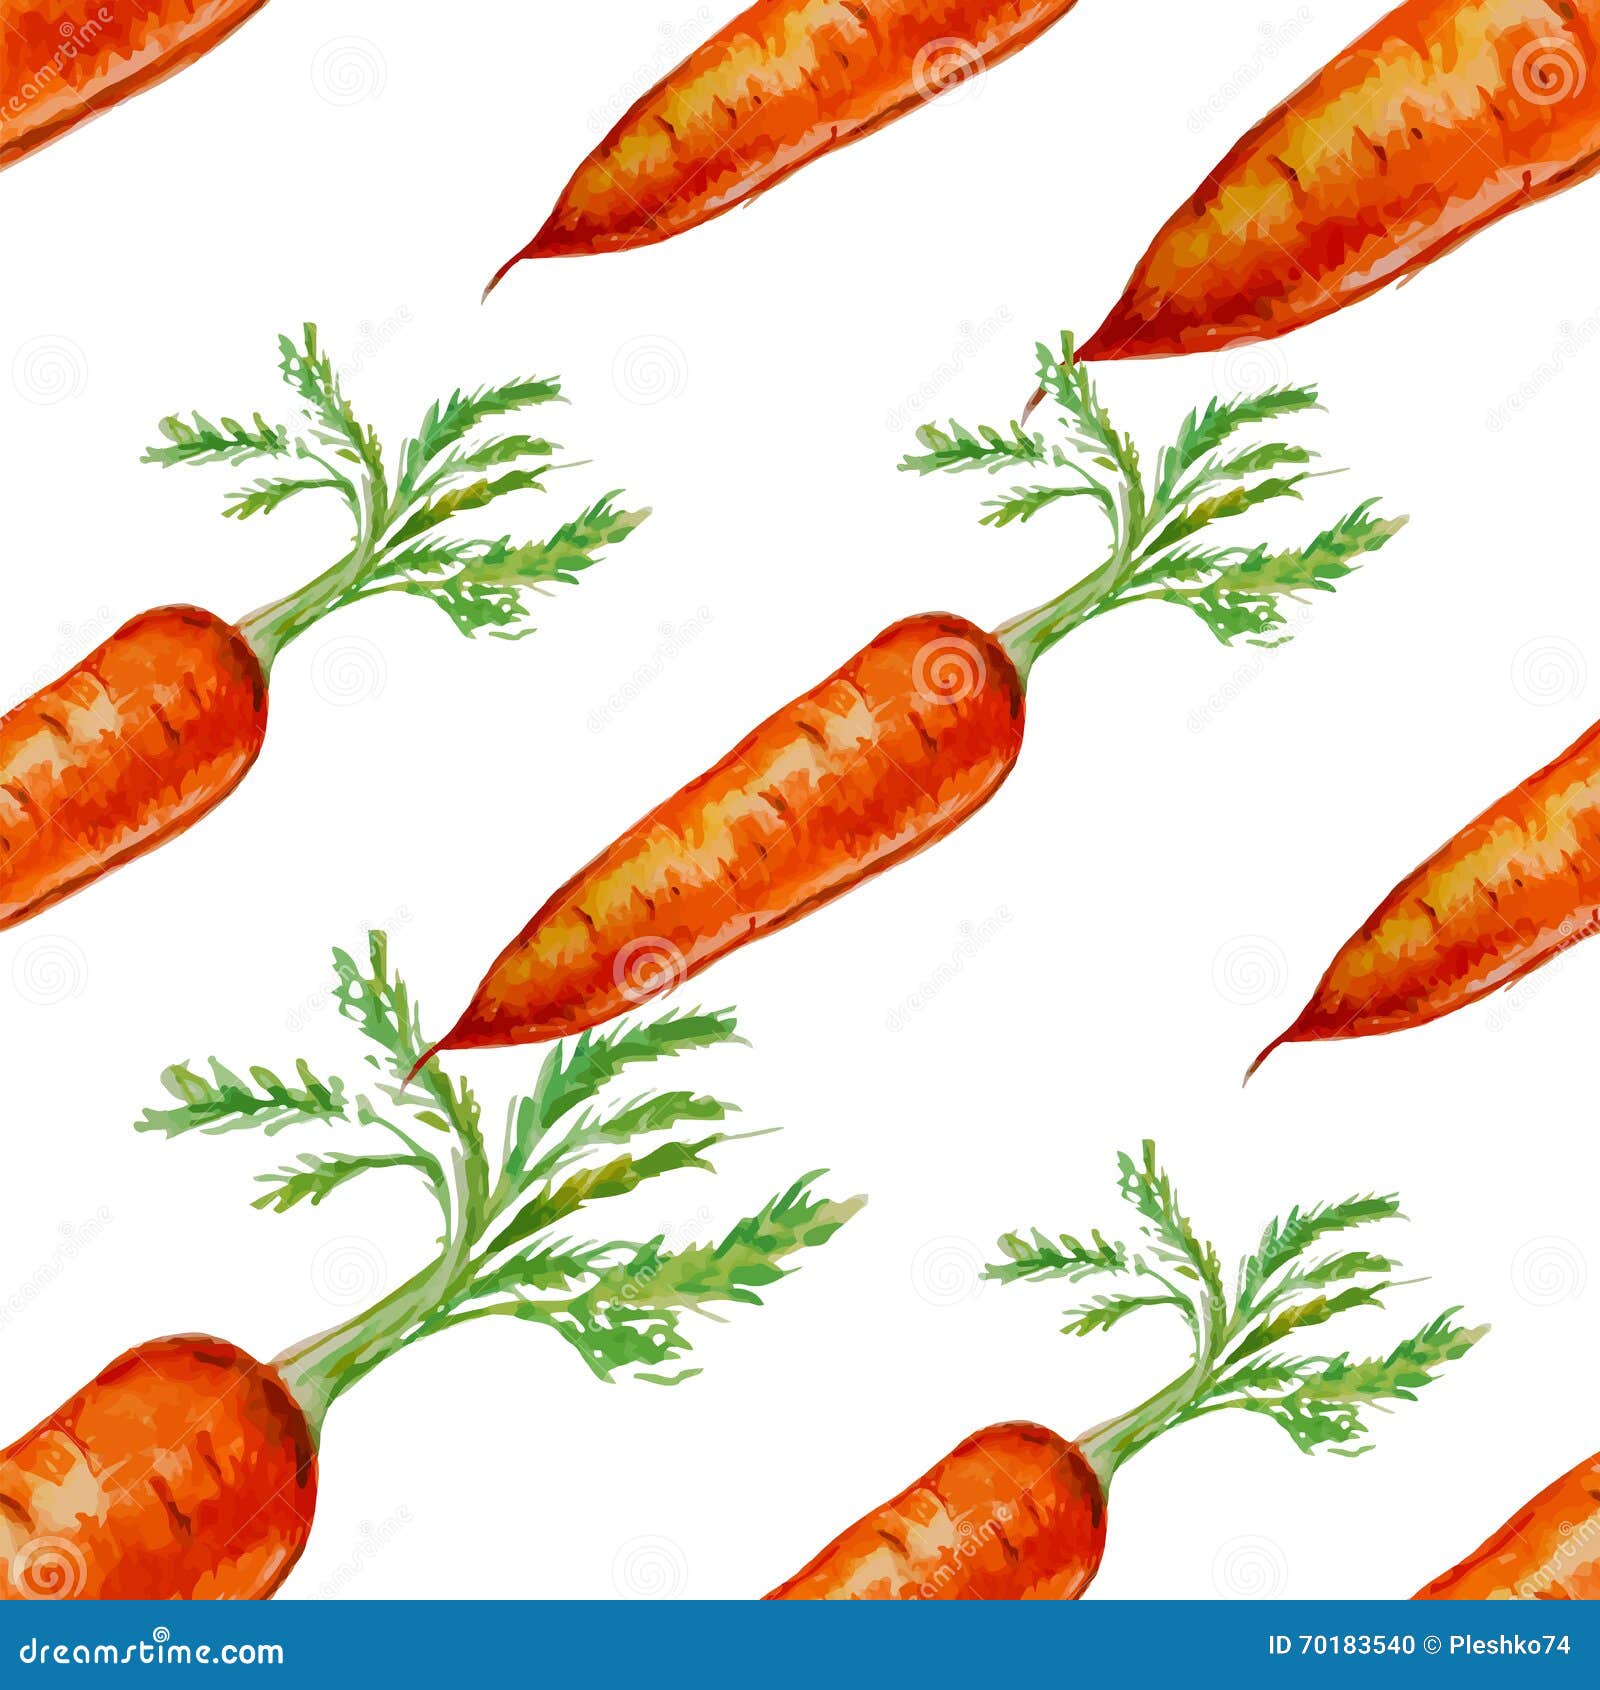 Page 13  Carrot Background Images  Free Download on Freepik